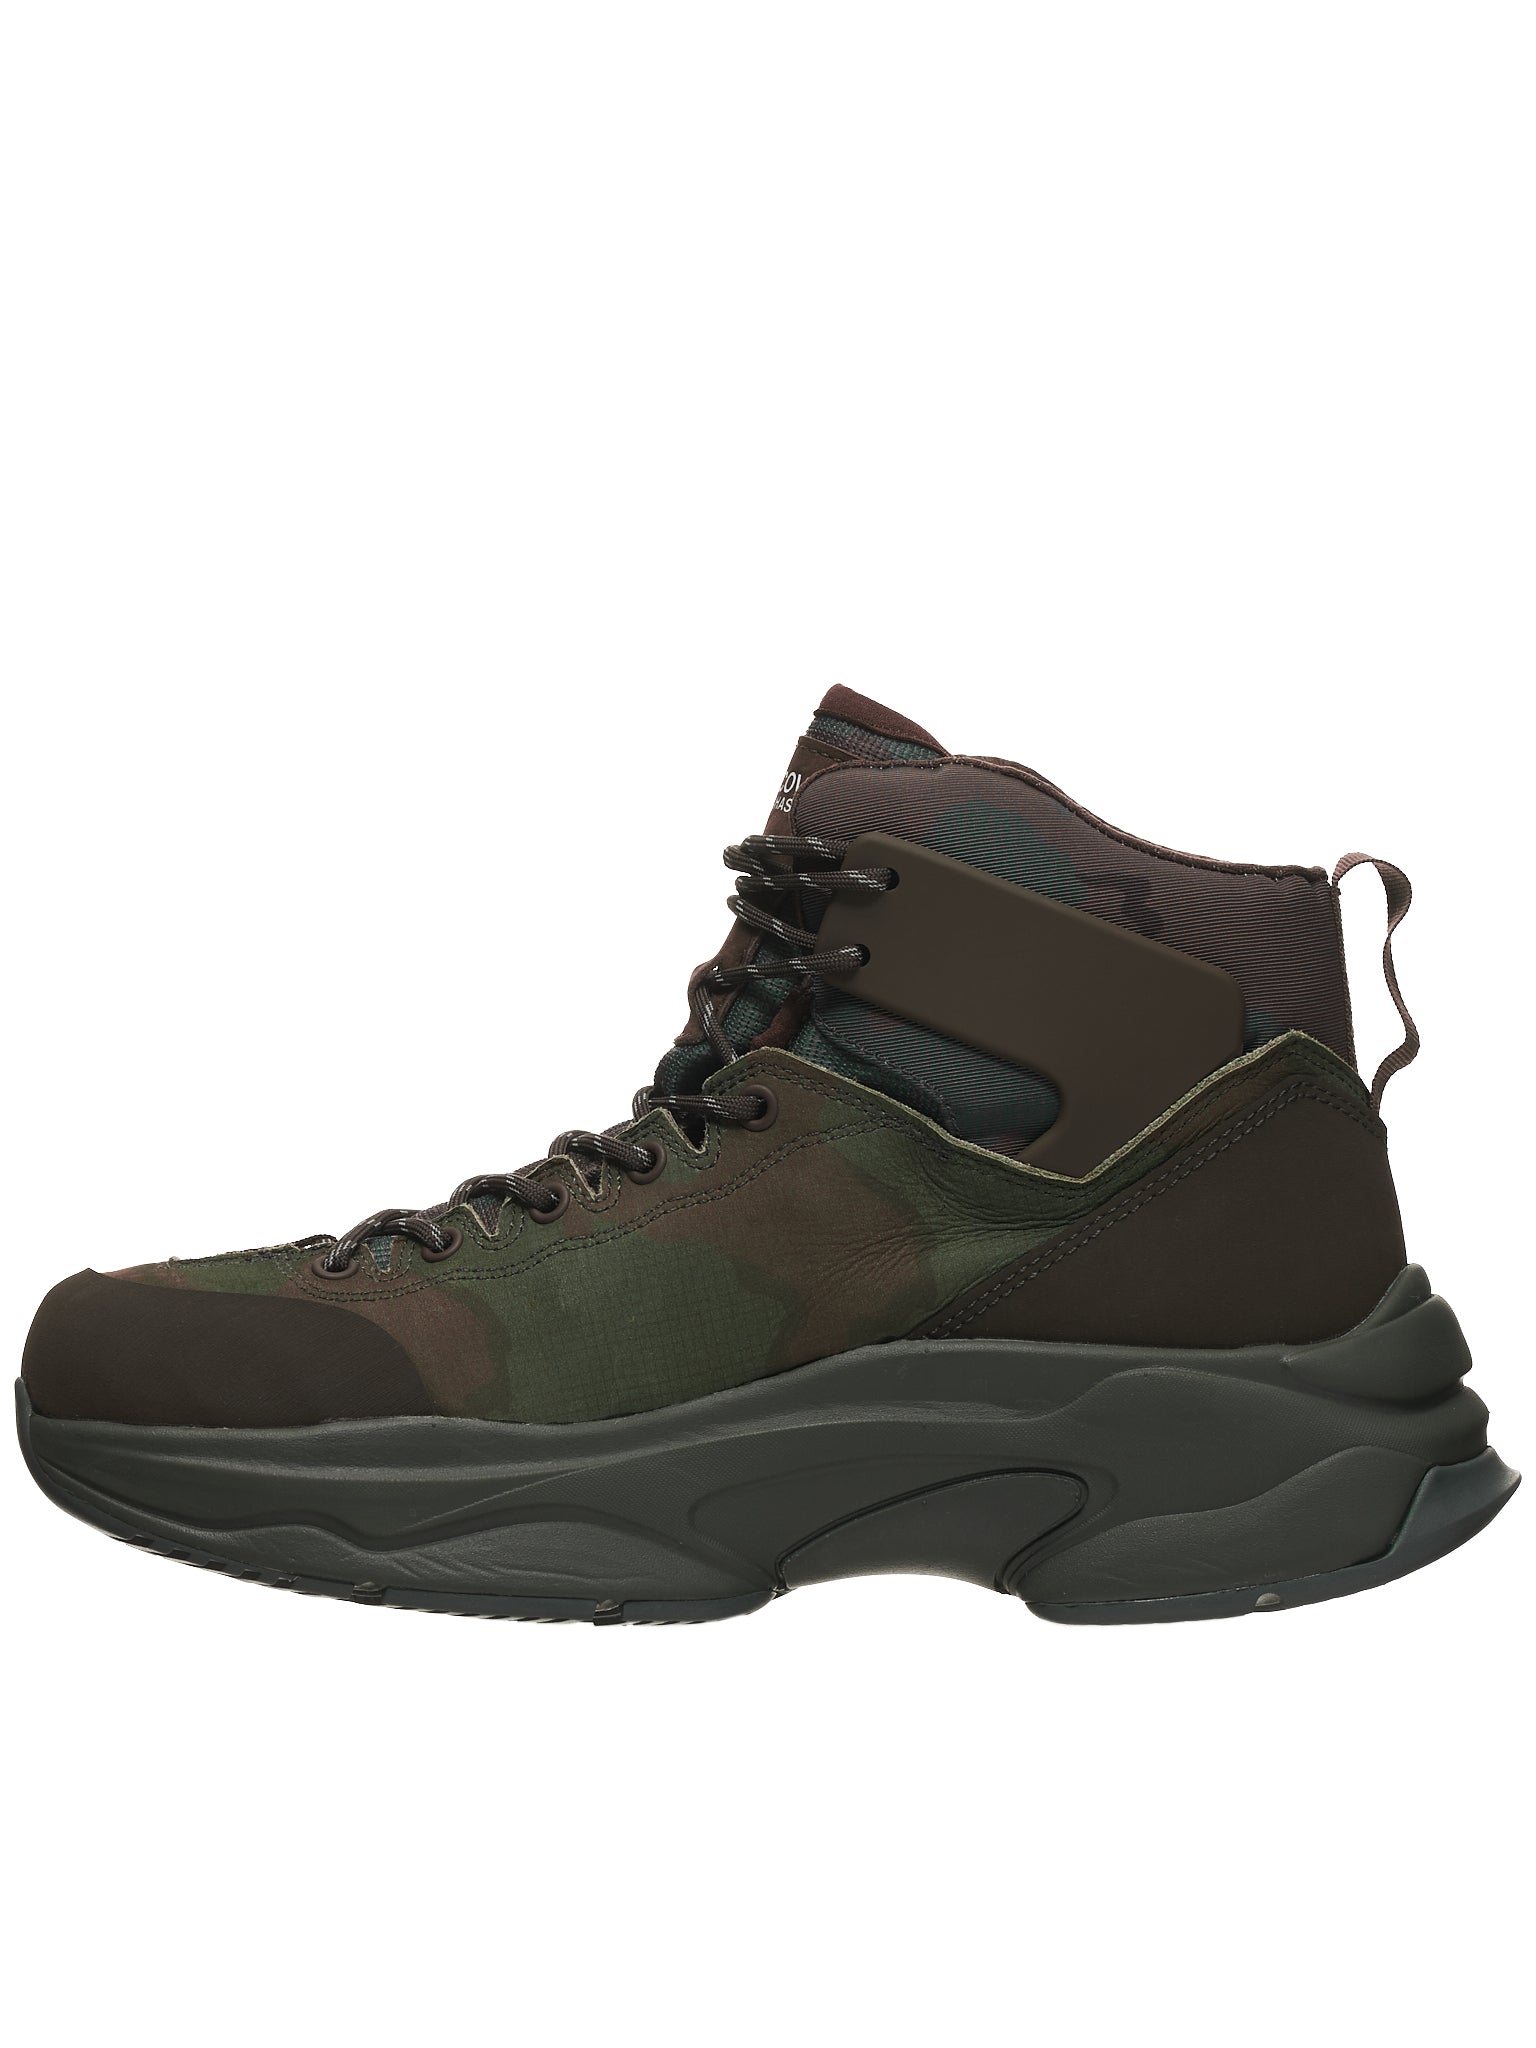 Undercover Camo Boots | H. Lorenzo - side 2